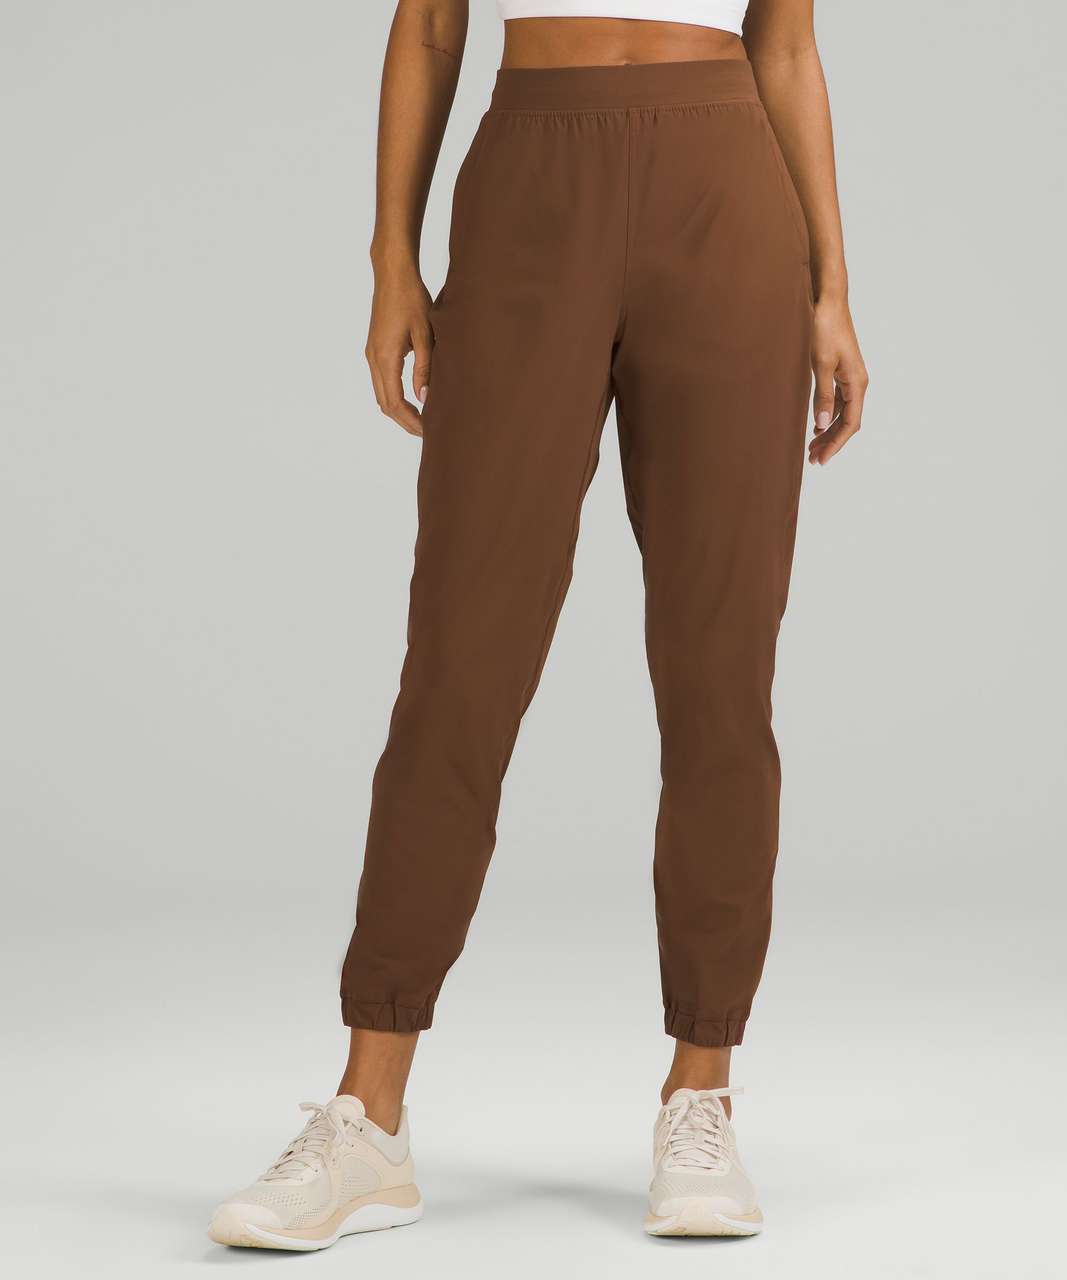 Lululemon Adapted State High-rise Joggers Full Length